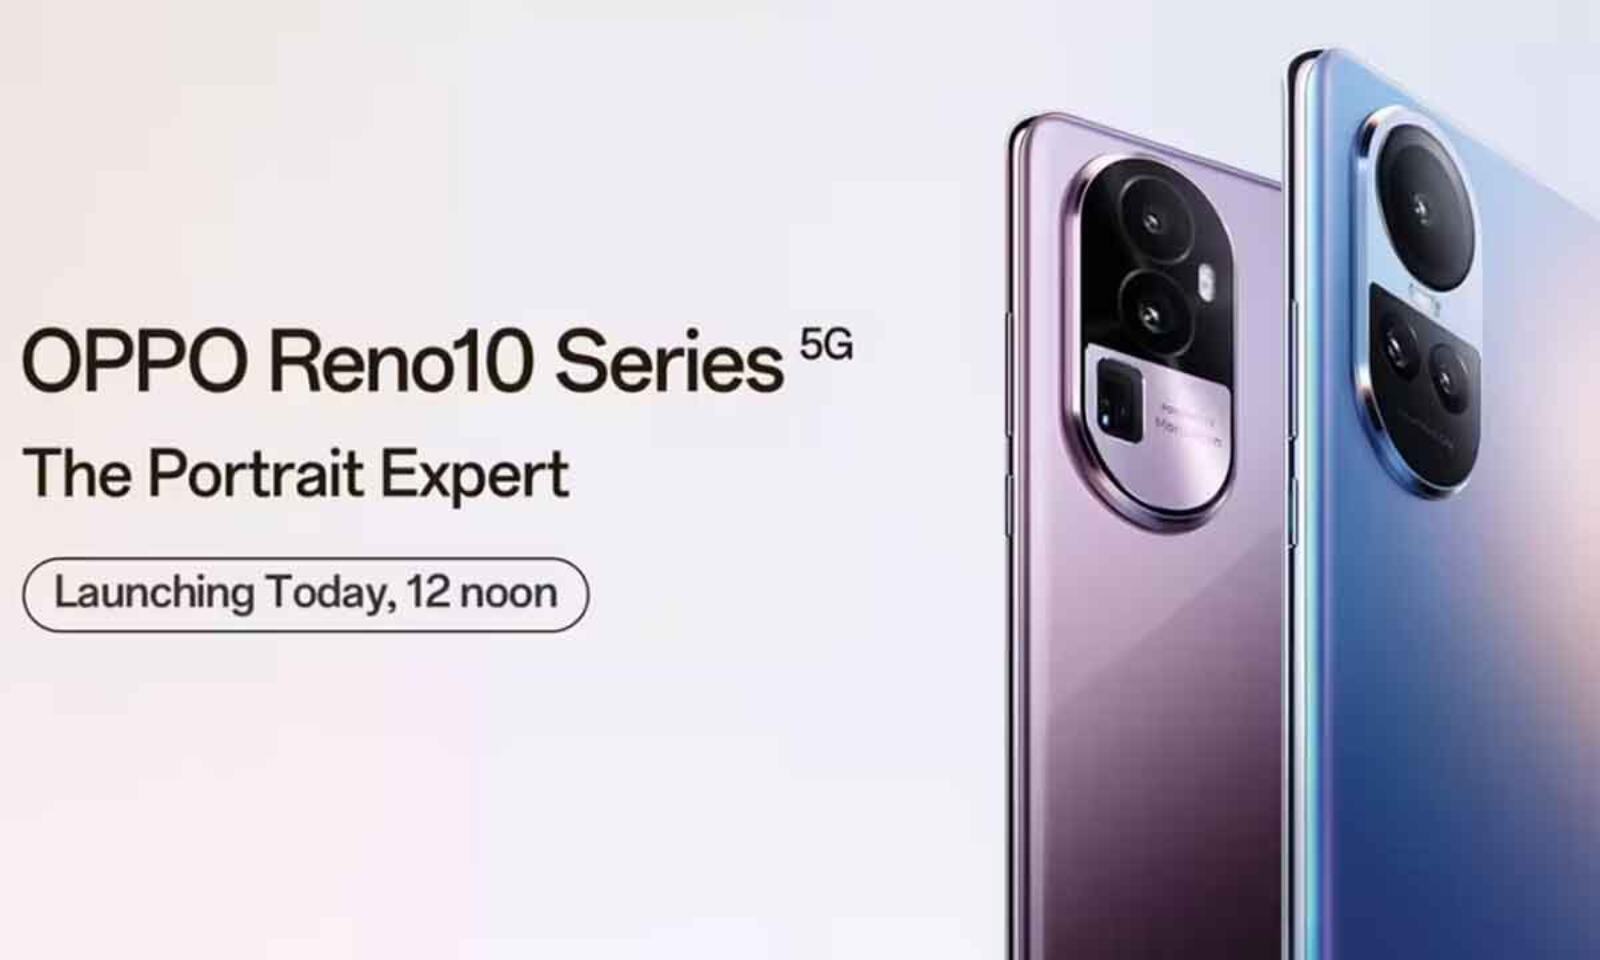 Oppo Reno 10 series to launch today at noon: Expected price and features